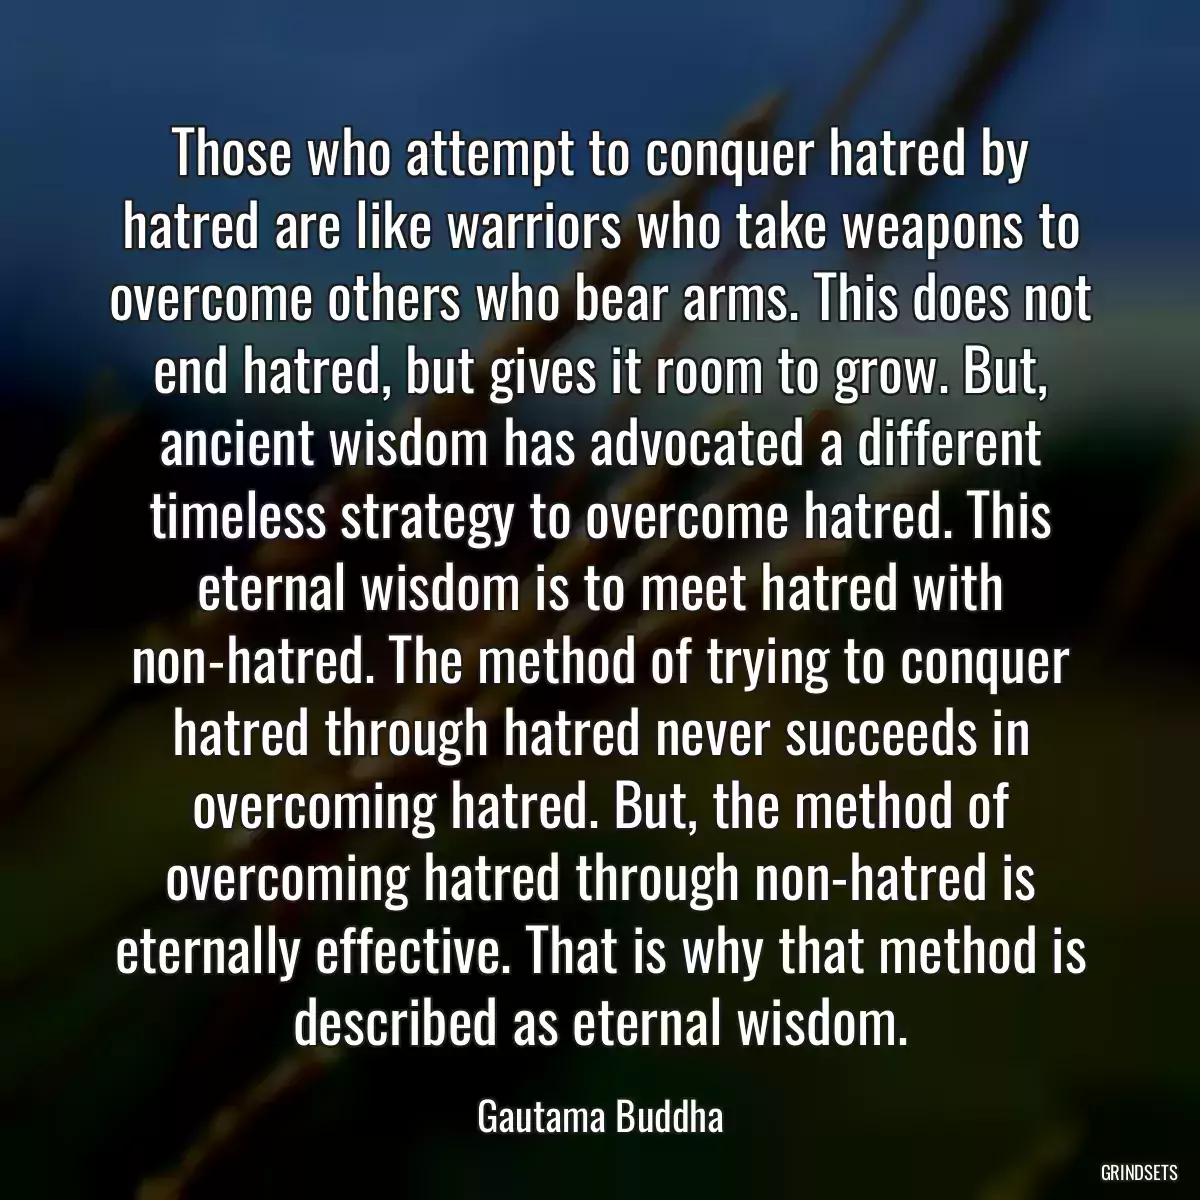 Those who attempt to conquer hatred by hatred are like warriors who take weapons to overcome others who bear arms. This does not end hatred, but gives it room to grow. But, ancient wisdom has advocated a different timeless strategy to overcome hatred. This eternal wisdom is to meet hatred with non-hatred. The method of trying to conquer hatred through hatred never succeeds in overcoming hatred. But, the method of overcoming hatred through non-hatred is eternally effective. That is why that method is described as eternal wisdom.